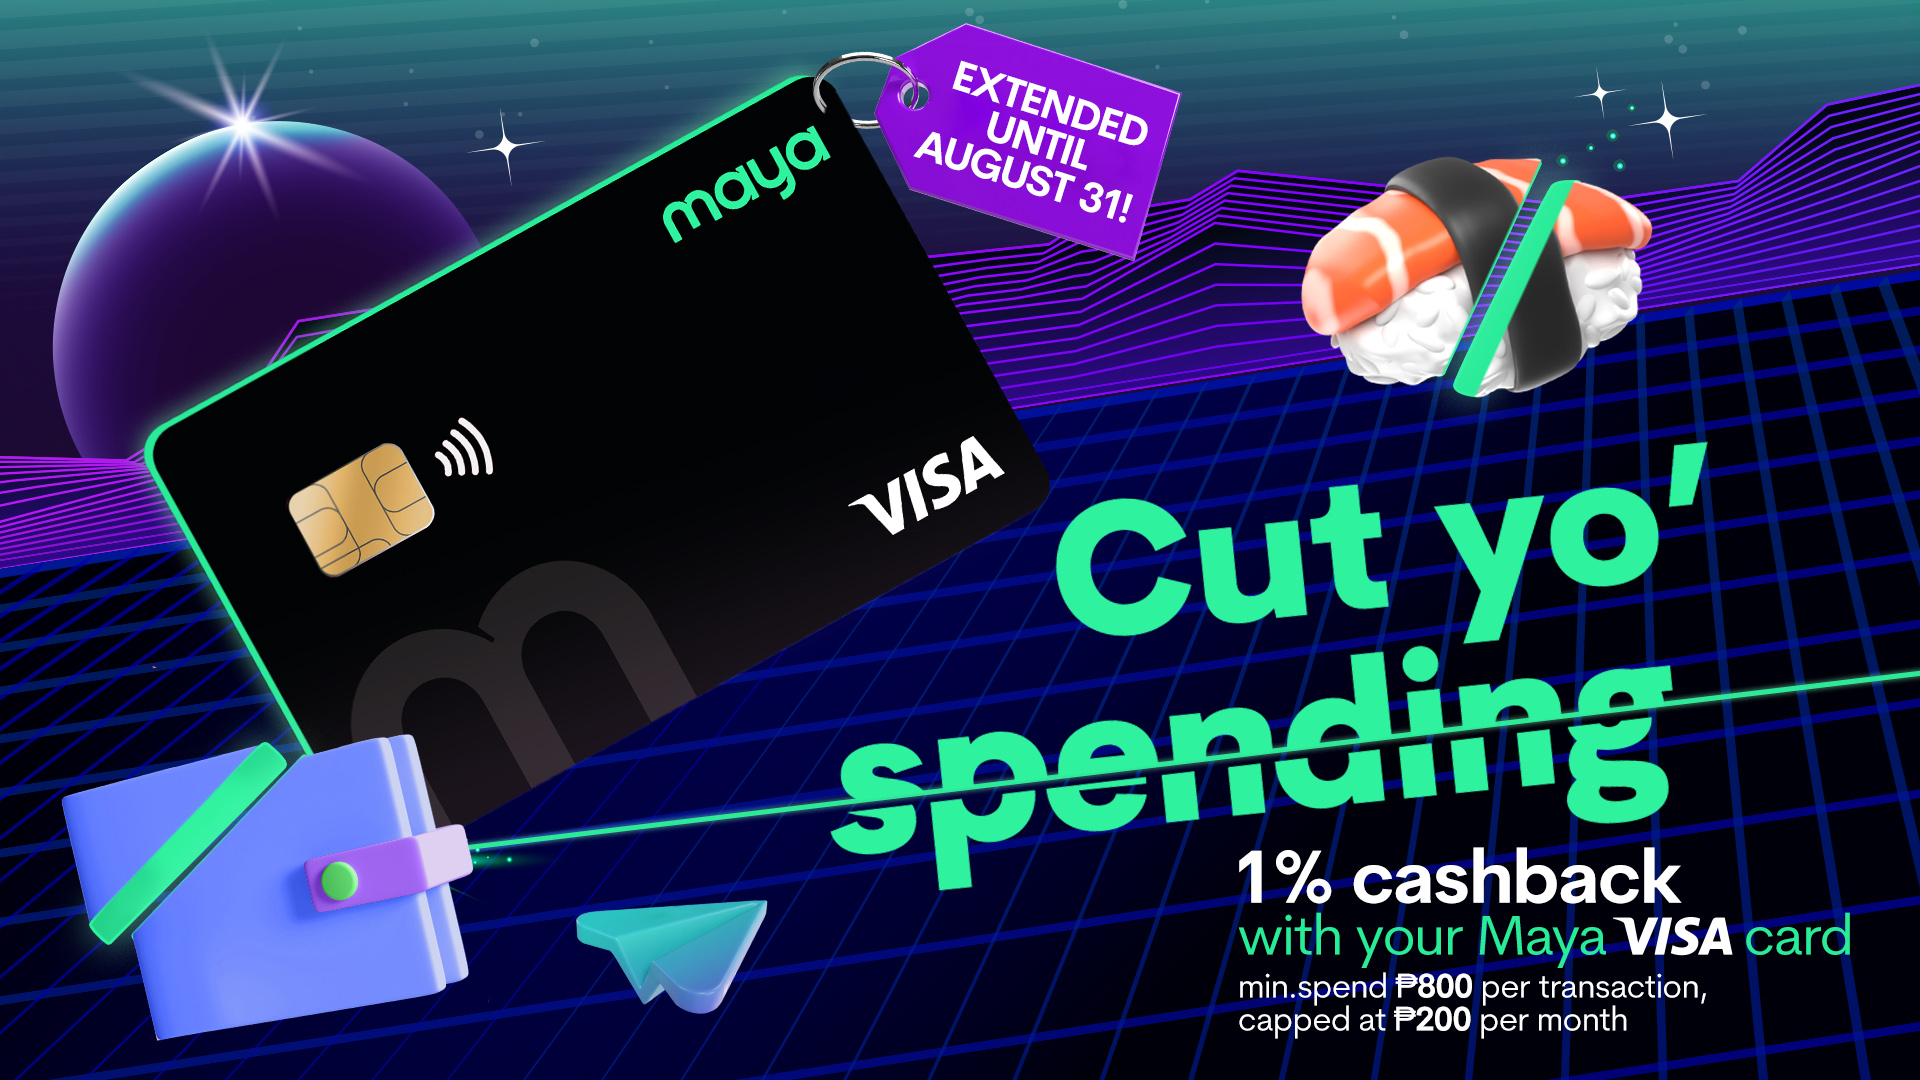 Get 1% on all your transactions with your Visa Card!